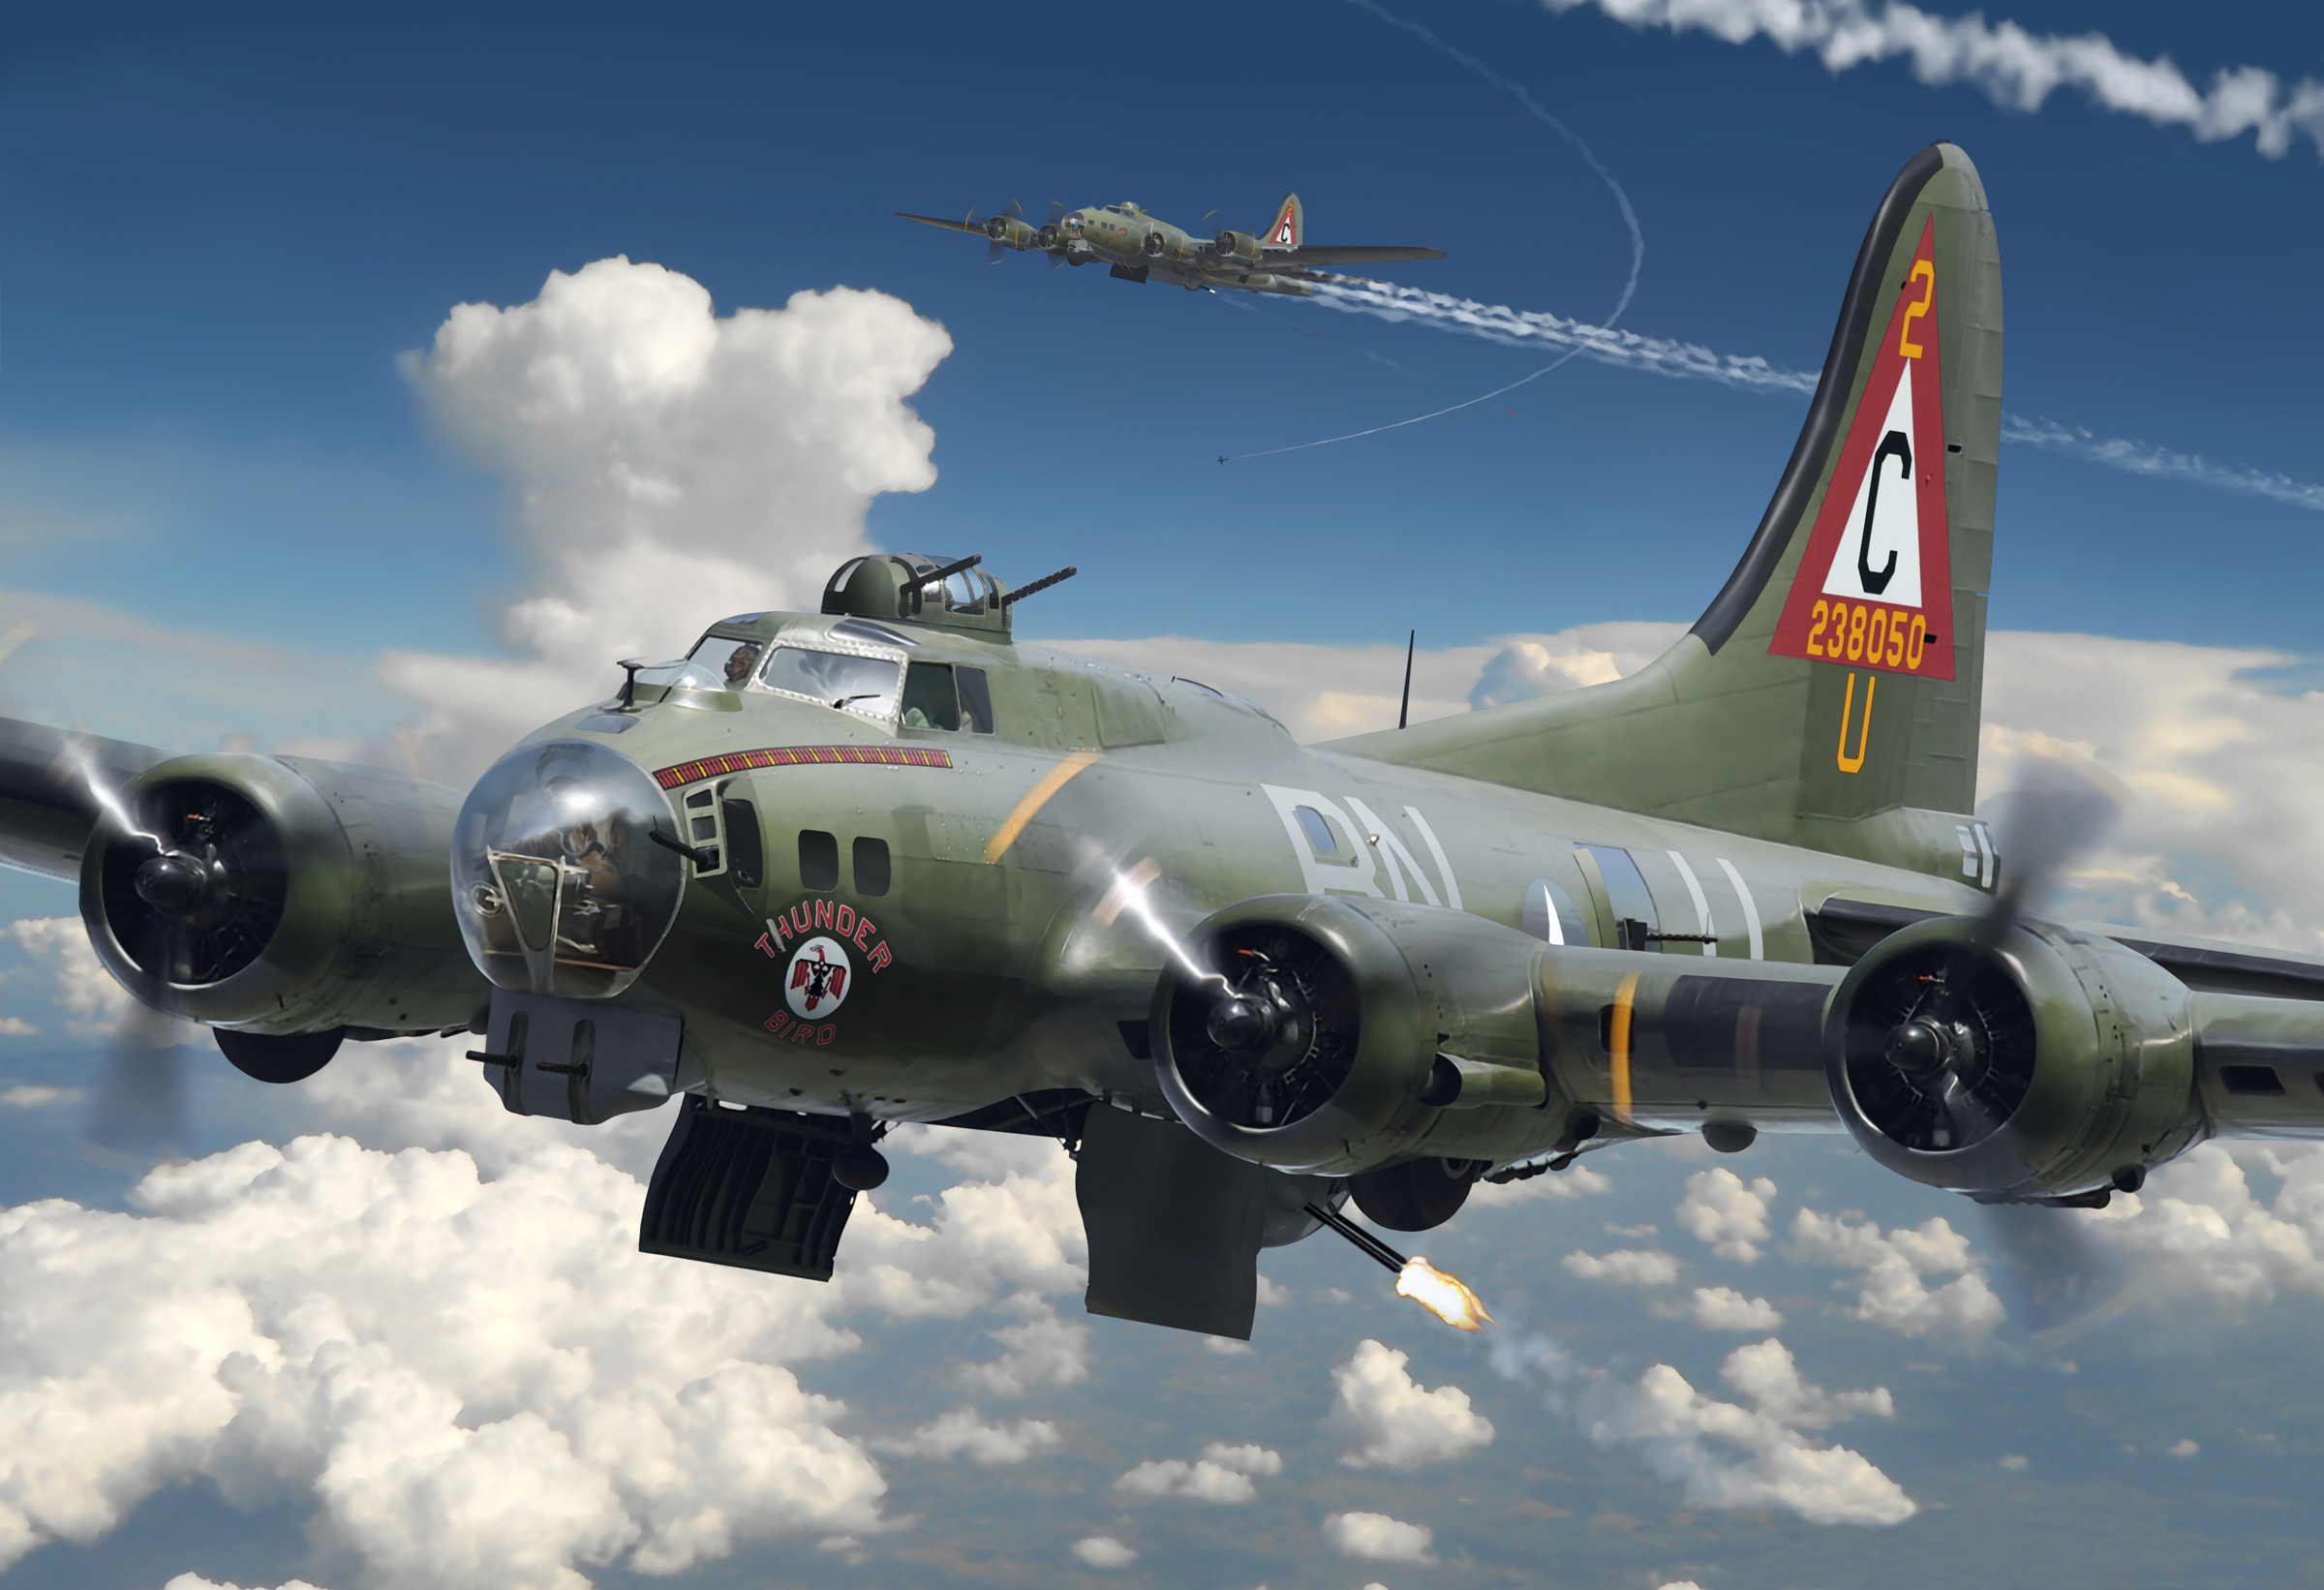 art, Airplane, Boeing, B 17, Flying, Fortress, Flying, Fortress, An, American, All metal, Heavy, Four engine, Bomber, The, Crew, Of, 10, People, The, Air, Force, The, United, States, Ww2, Military Wallpaper